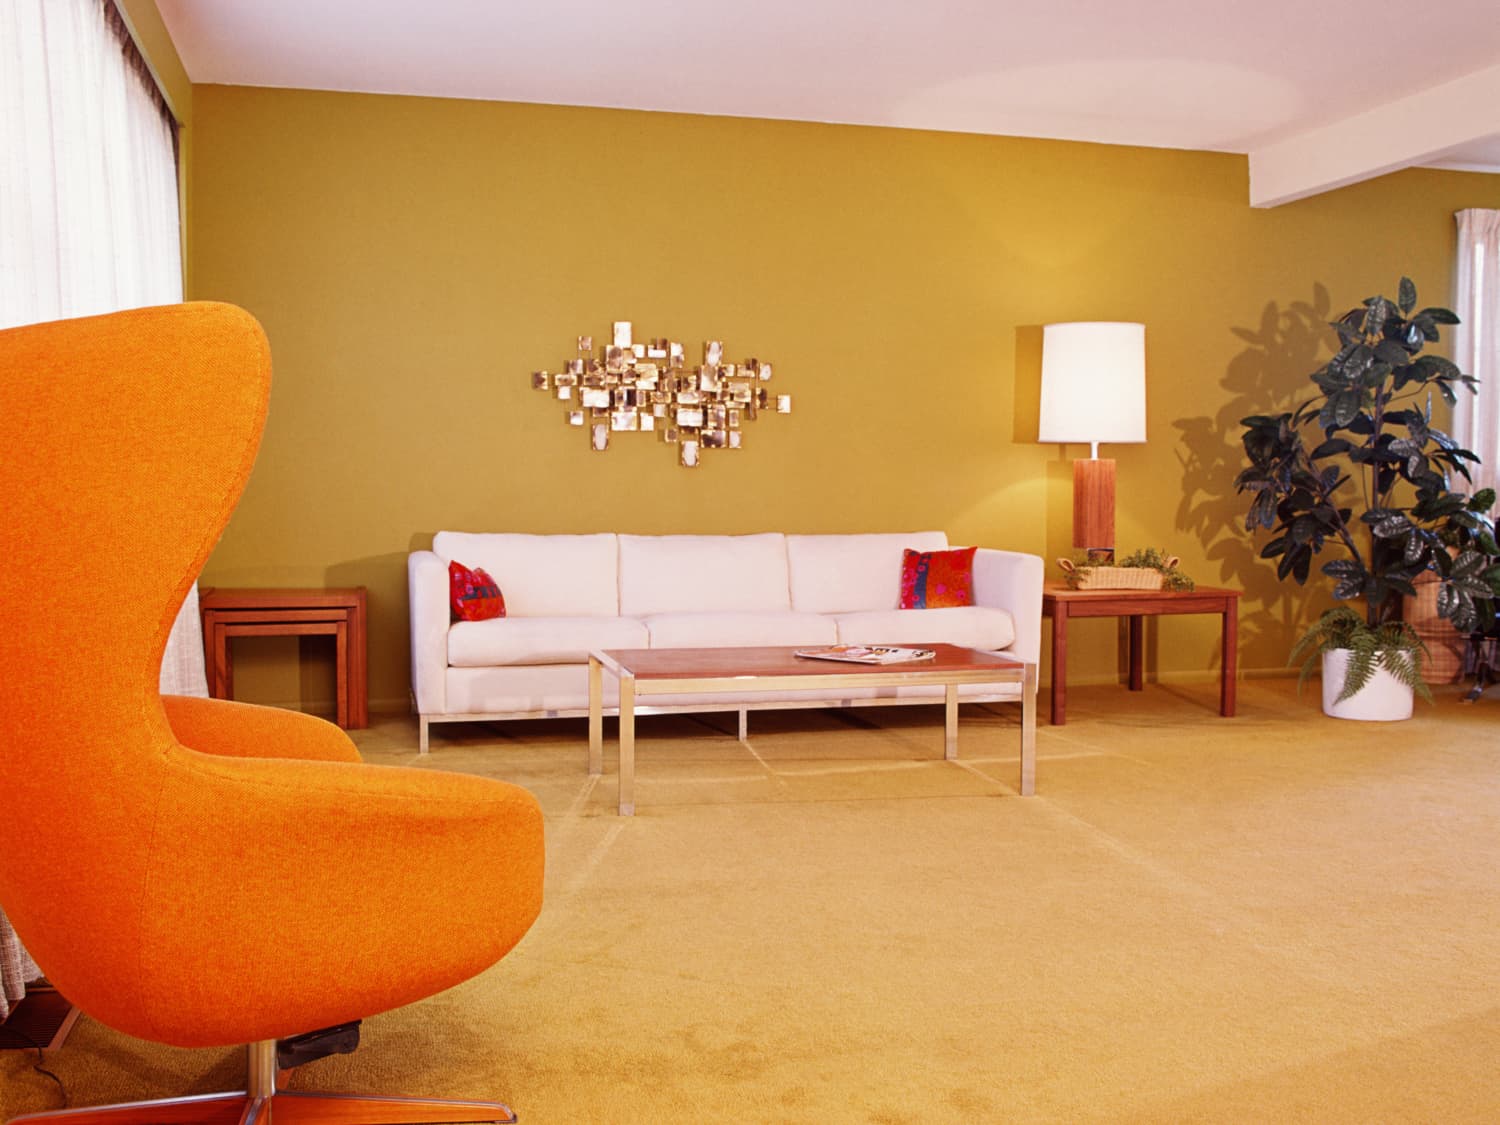 These Colors Dominated Homes for the Past 70 Years - House Colors by Decade  | Apartment Therapy